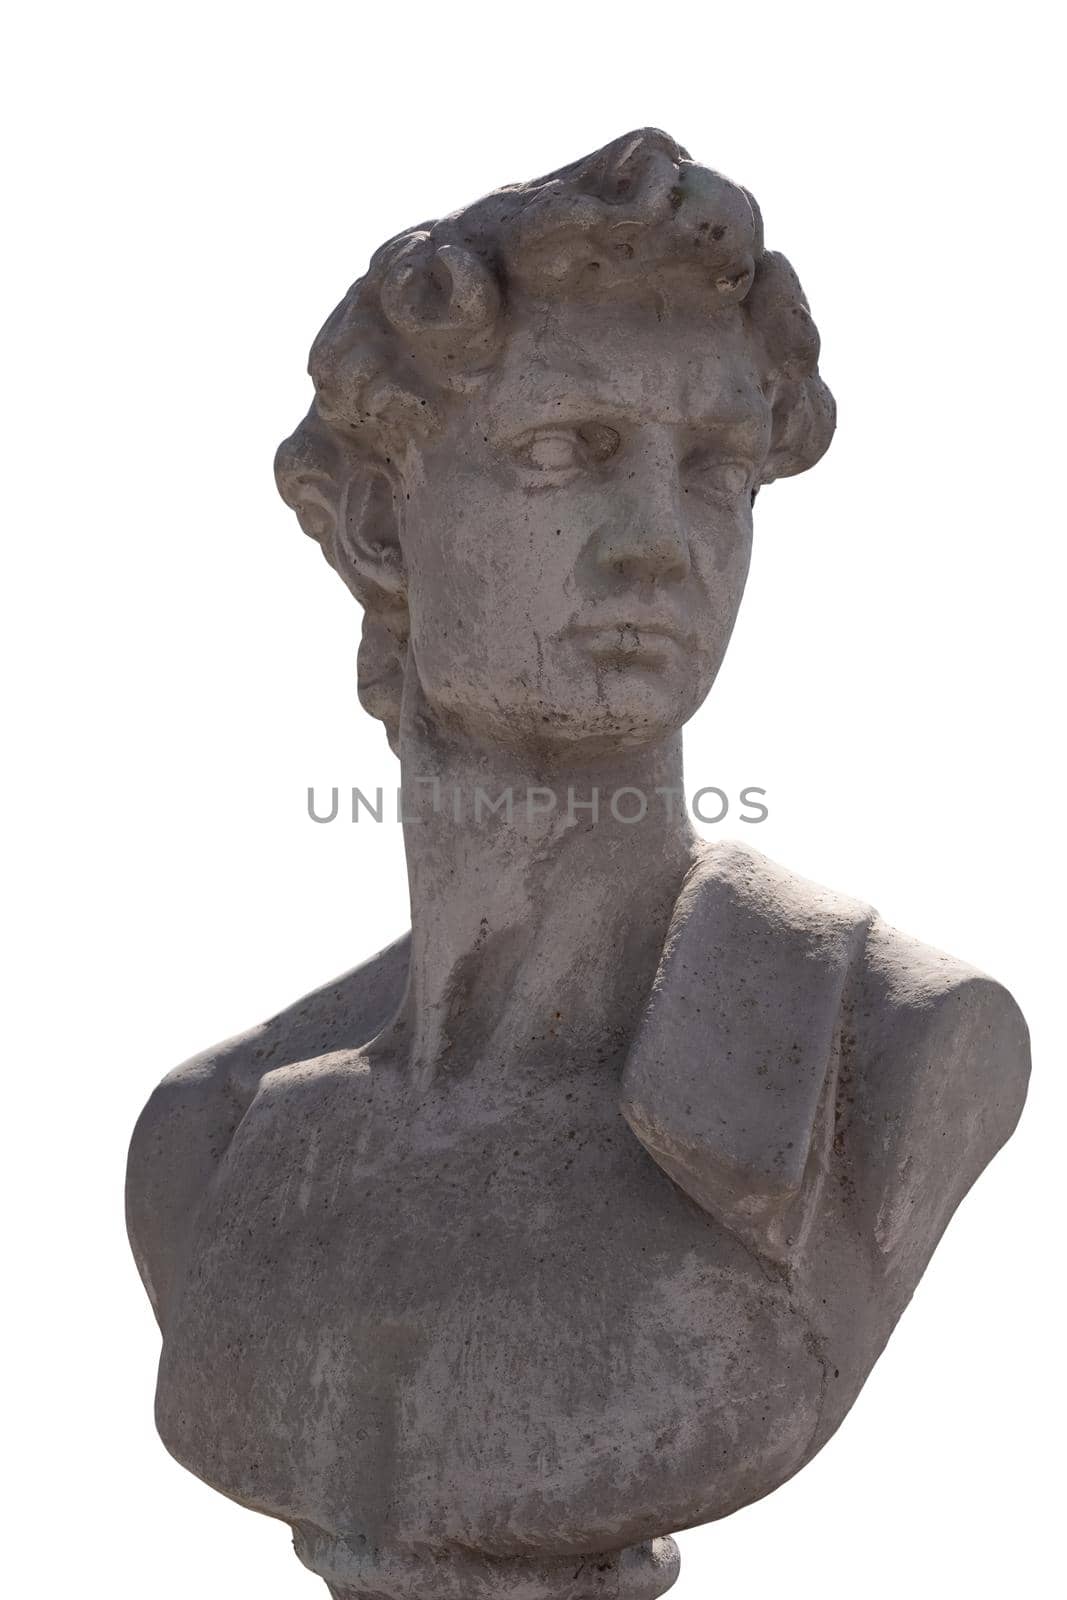 Close up of ancient stone sculpture of man's bust on white background. art and classical style romantic figurative stone sculpture.